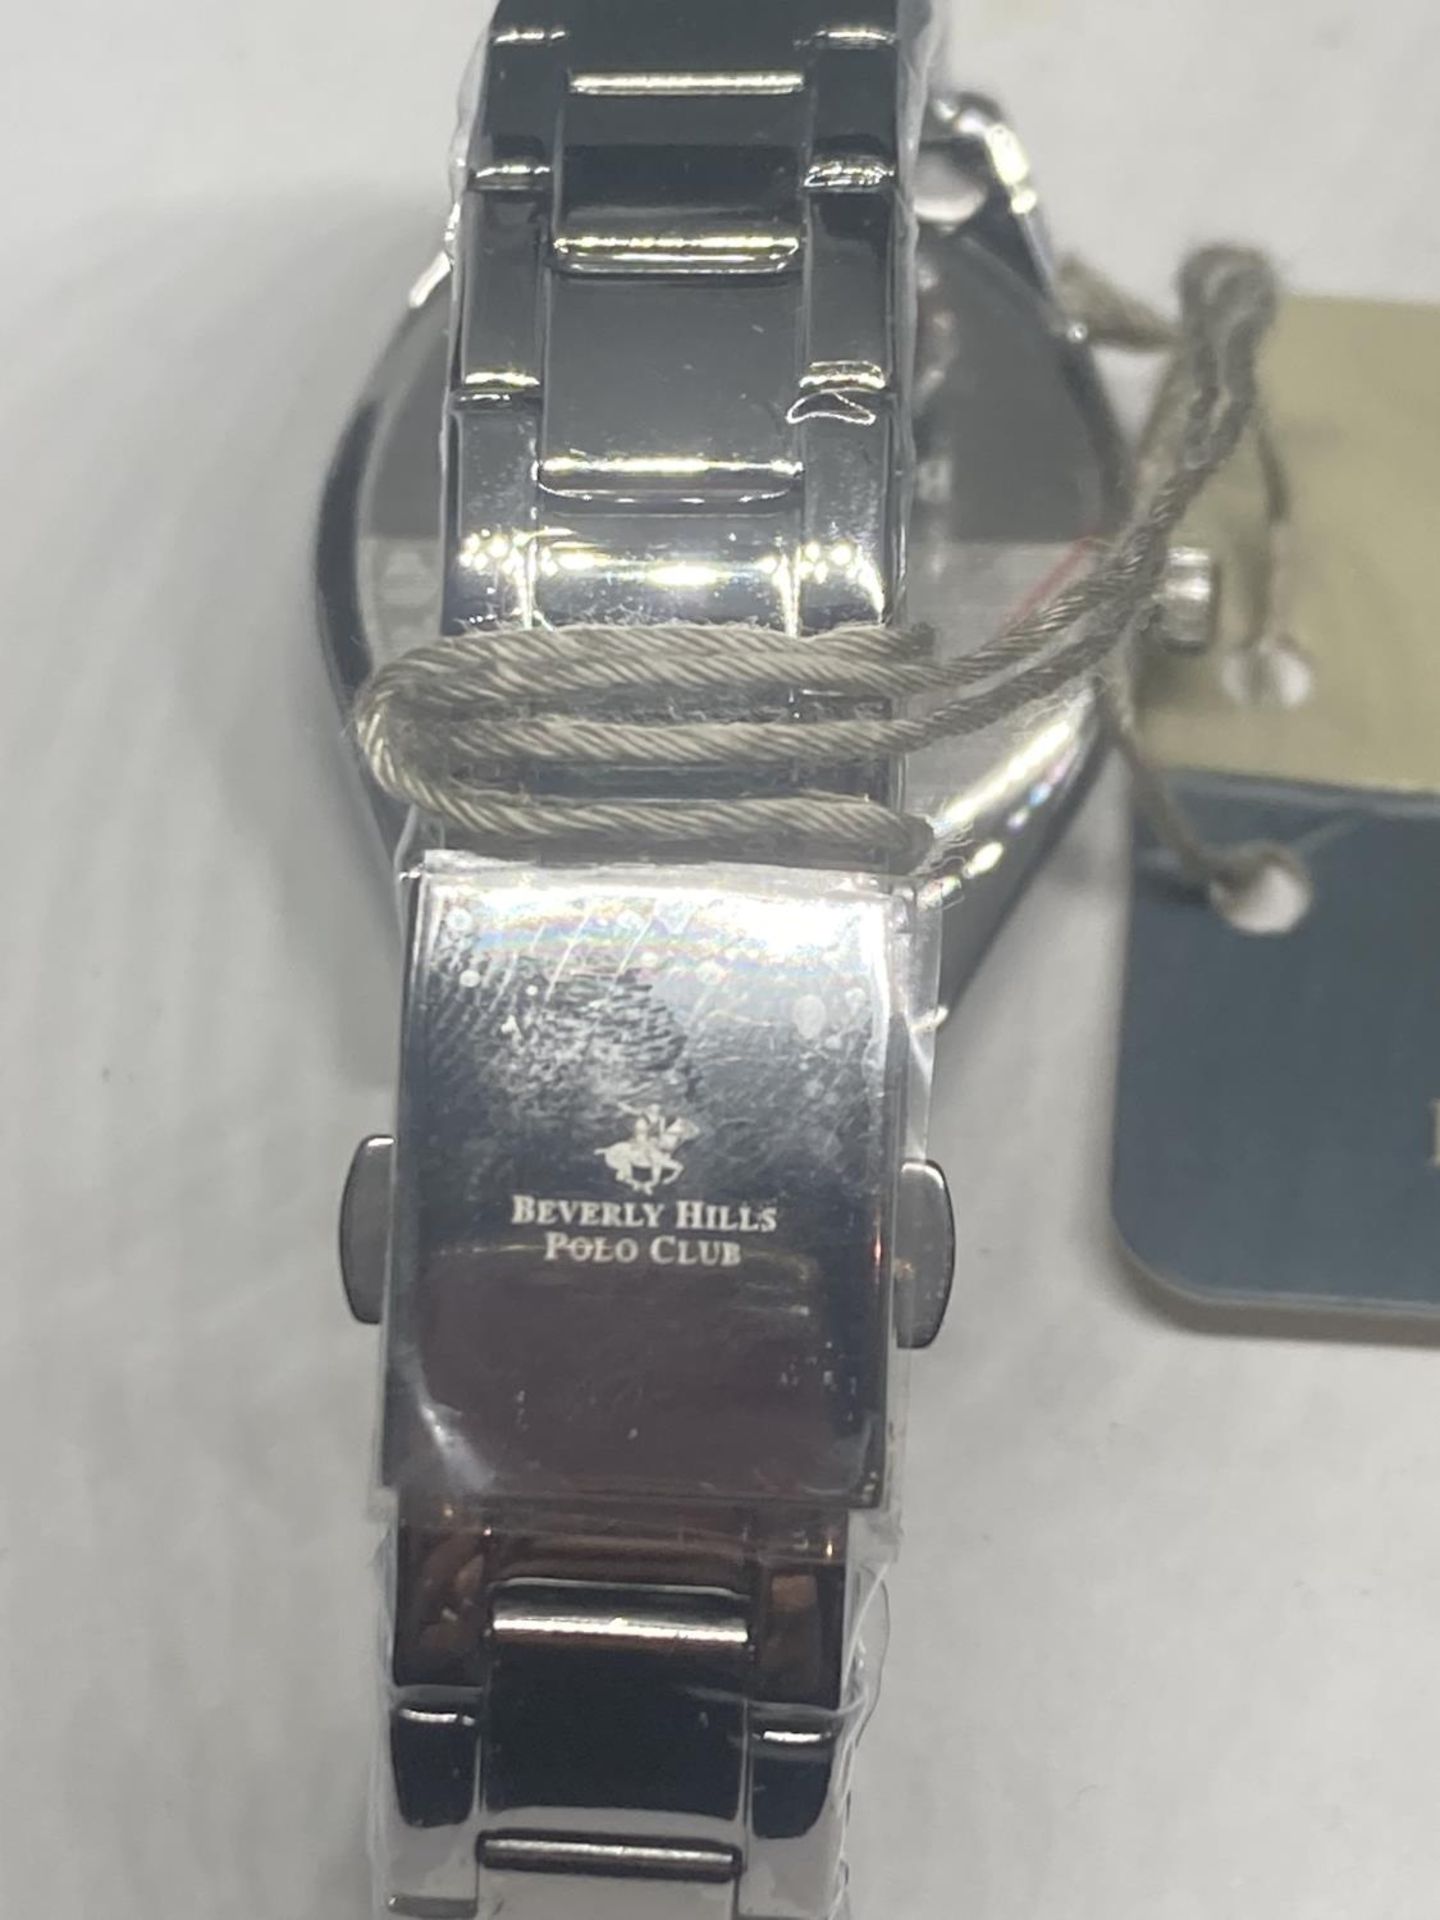 AN AS NEW AND BOXED BEVERLEY HILLS POLO CLUB WRIST WATCH SEEN WORKING BUT NO WARRANTY - Image 6 of 10